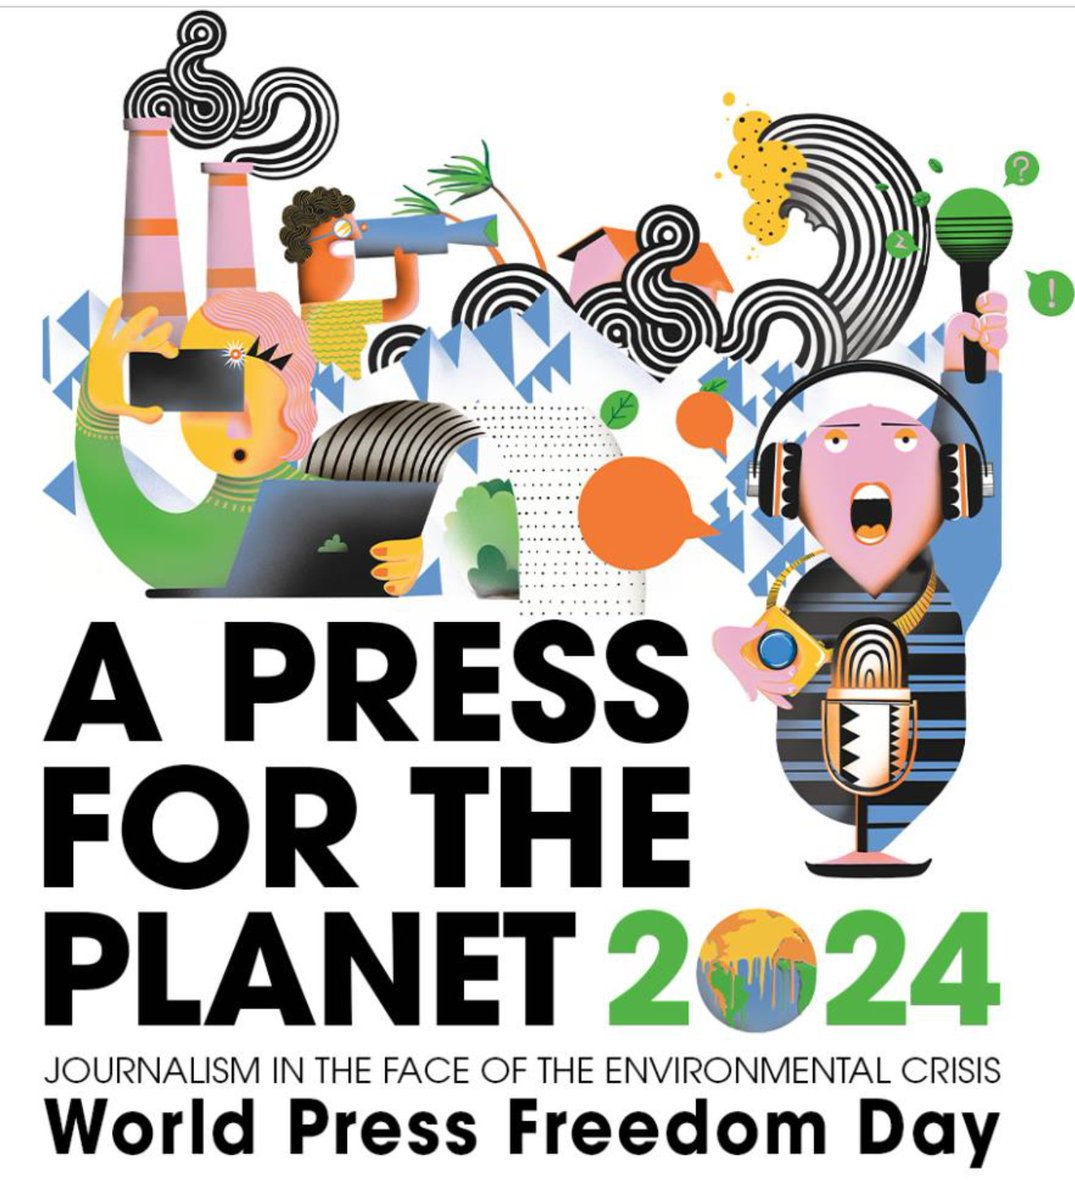 🌐Join us at @UNESCO World Press Freedom Day 2024! Our panel, 'A Press for the Planet: Journalism in the Face of the Environmental Crisis', spotlights: 🌱overlooked climate narratives 💡innovative storytelling 🌍inclusive perspectives Read more⬇️ shorturl.at/ckMN3